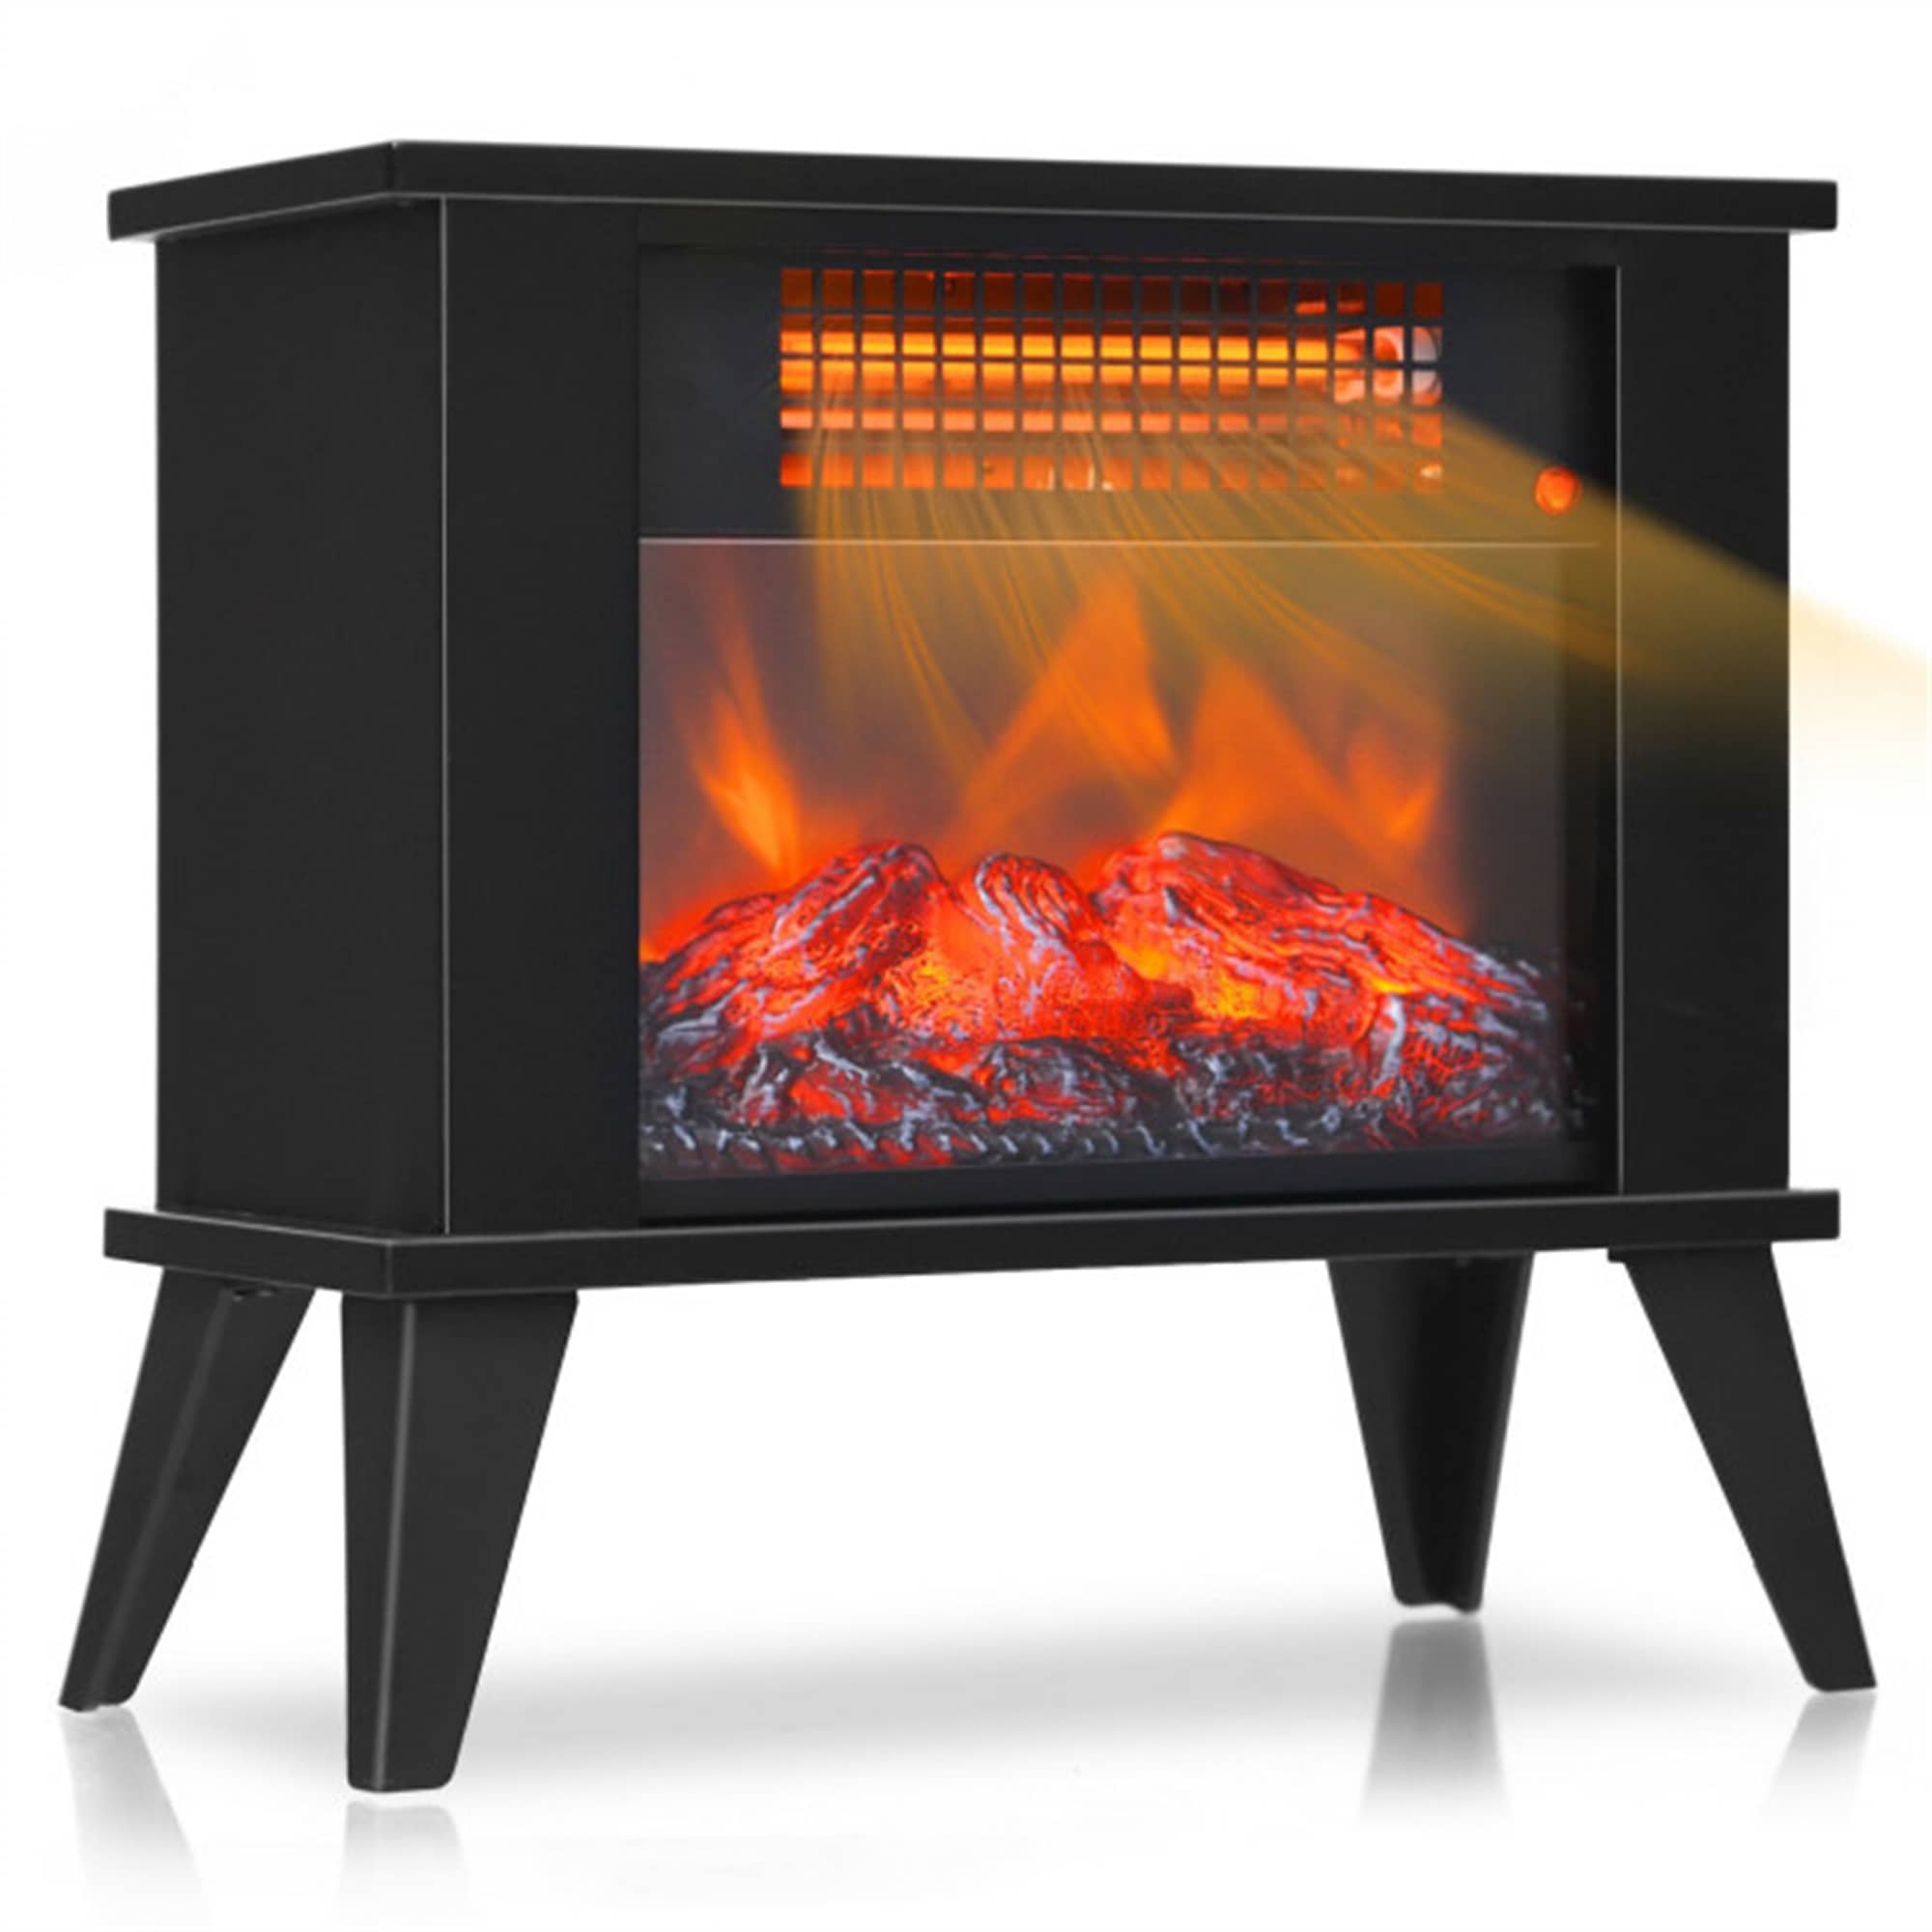 CASAINC 14 Inches Portable Electric Fireplace Heater with Realistic Flame Effect